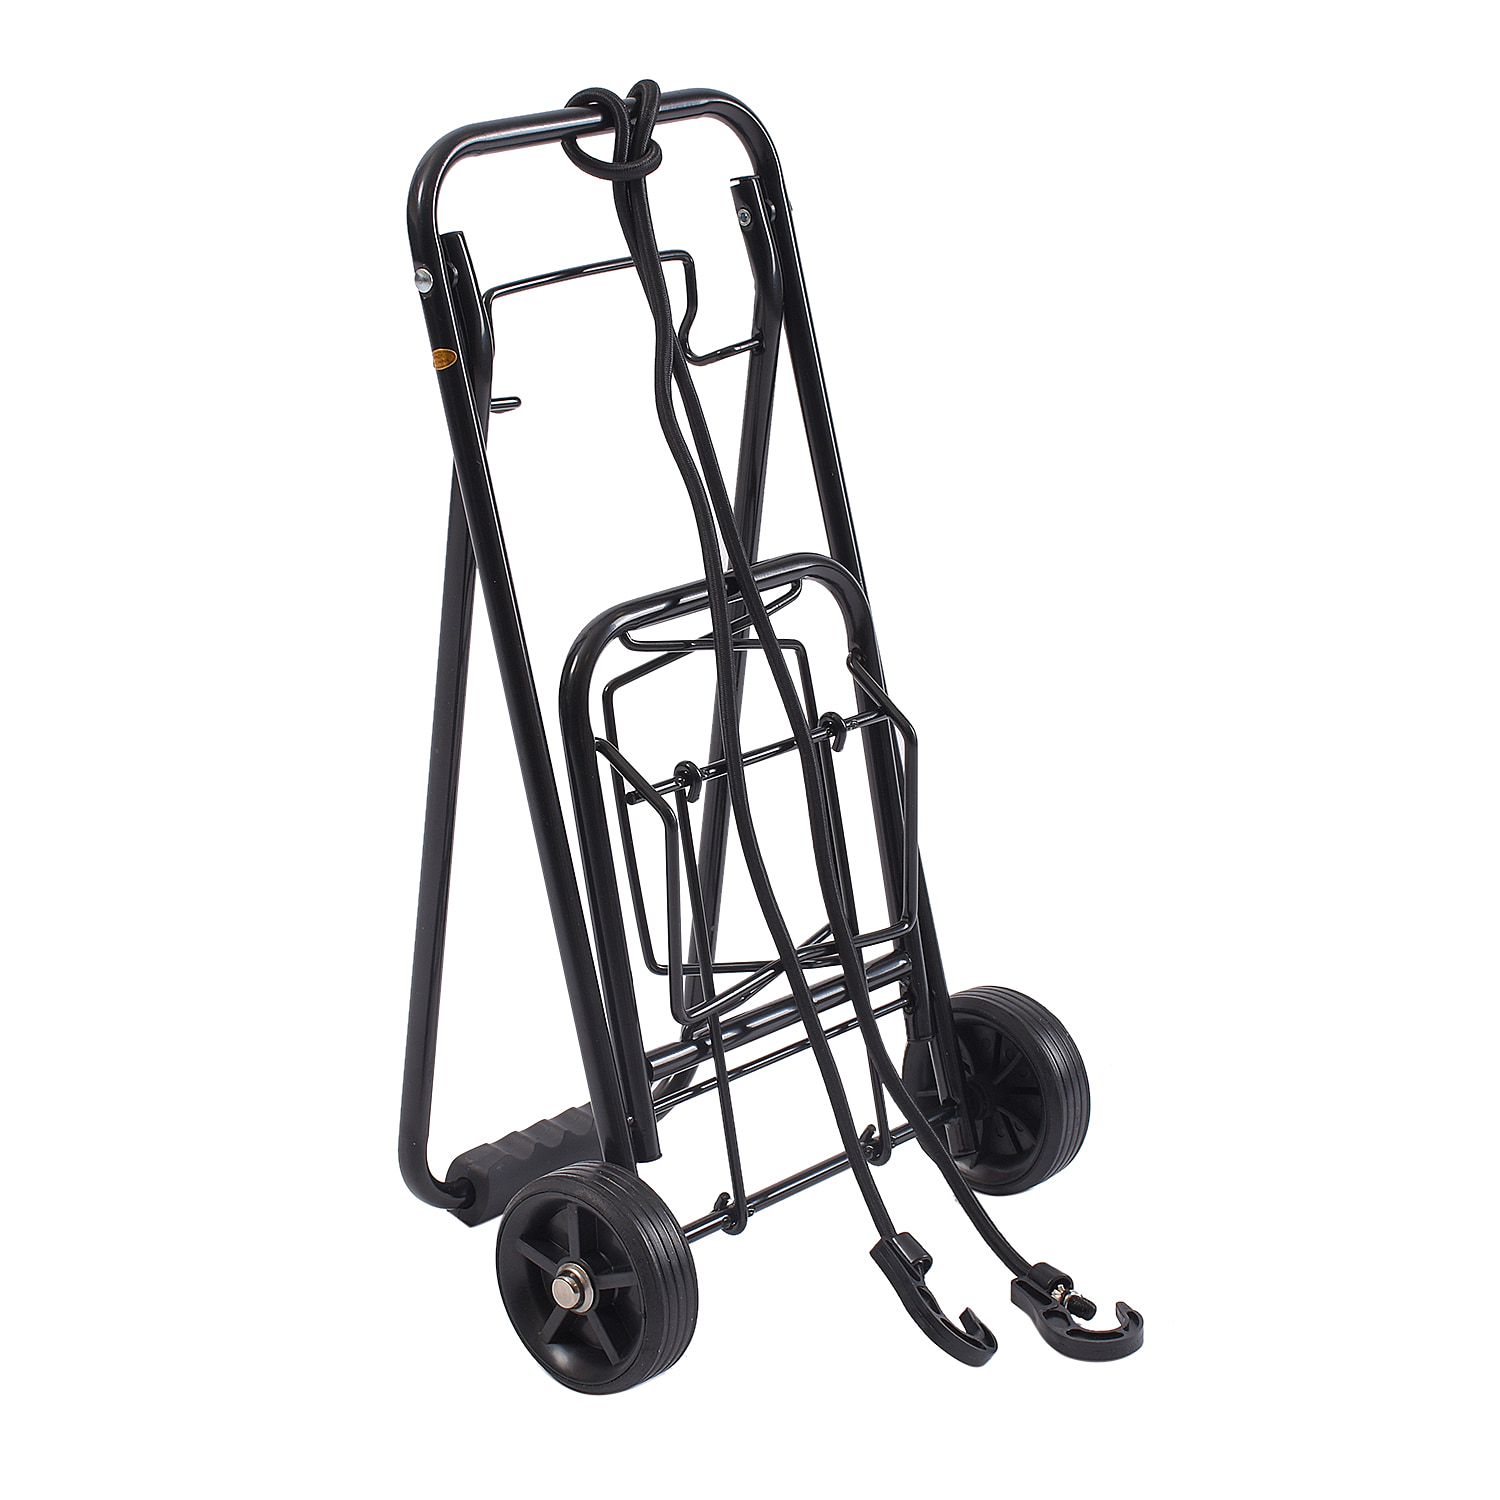 30Kg Heavy Duty Folding Metal Trolley - Black - Move With Ease - Small White Goods, Garden Pots, Compost, Shopping, Boxes, Festival Trolley.